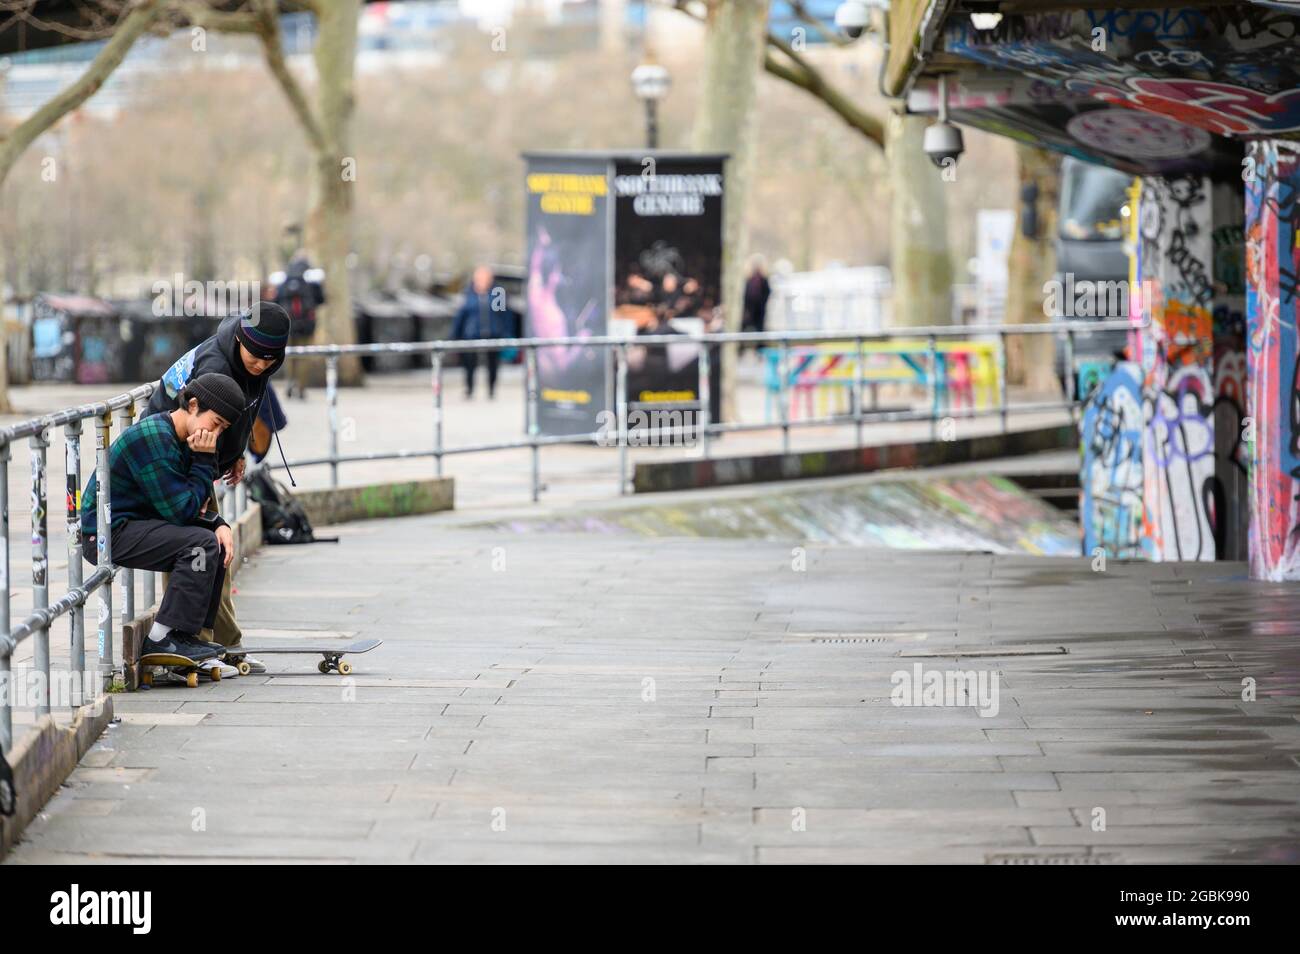 LONDON - MARCH 10, 2020: Friends taking a break from skateboarding at a  skate park on the South Bank of the river Thames, London Stock Photo - Alamy